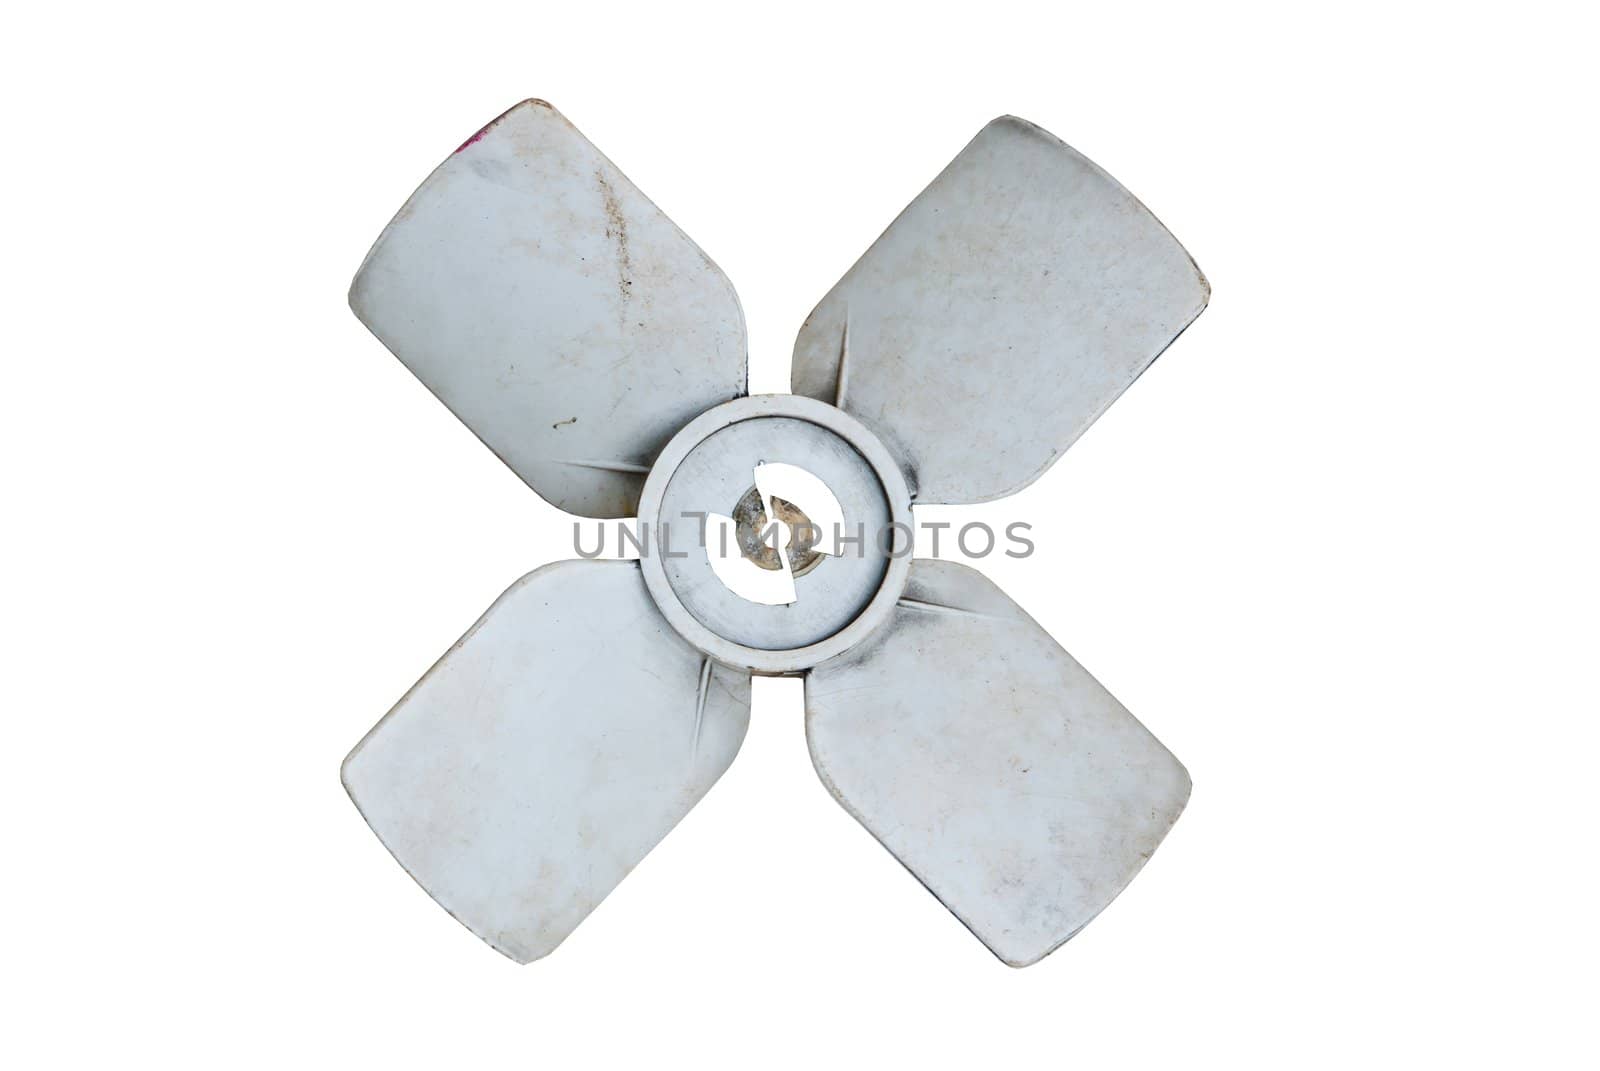 Dirty plastic white fan on isolated white background
